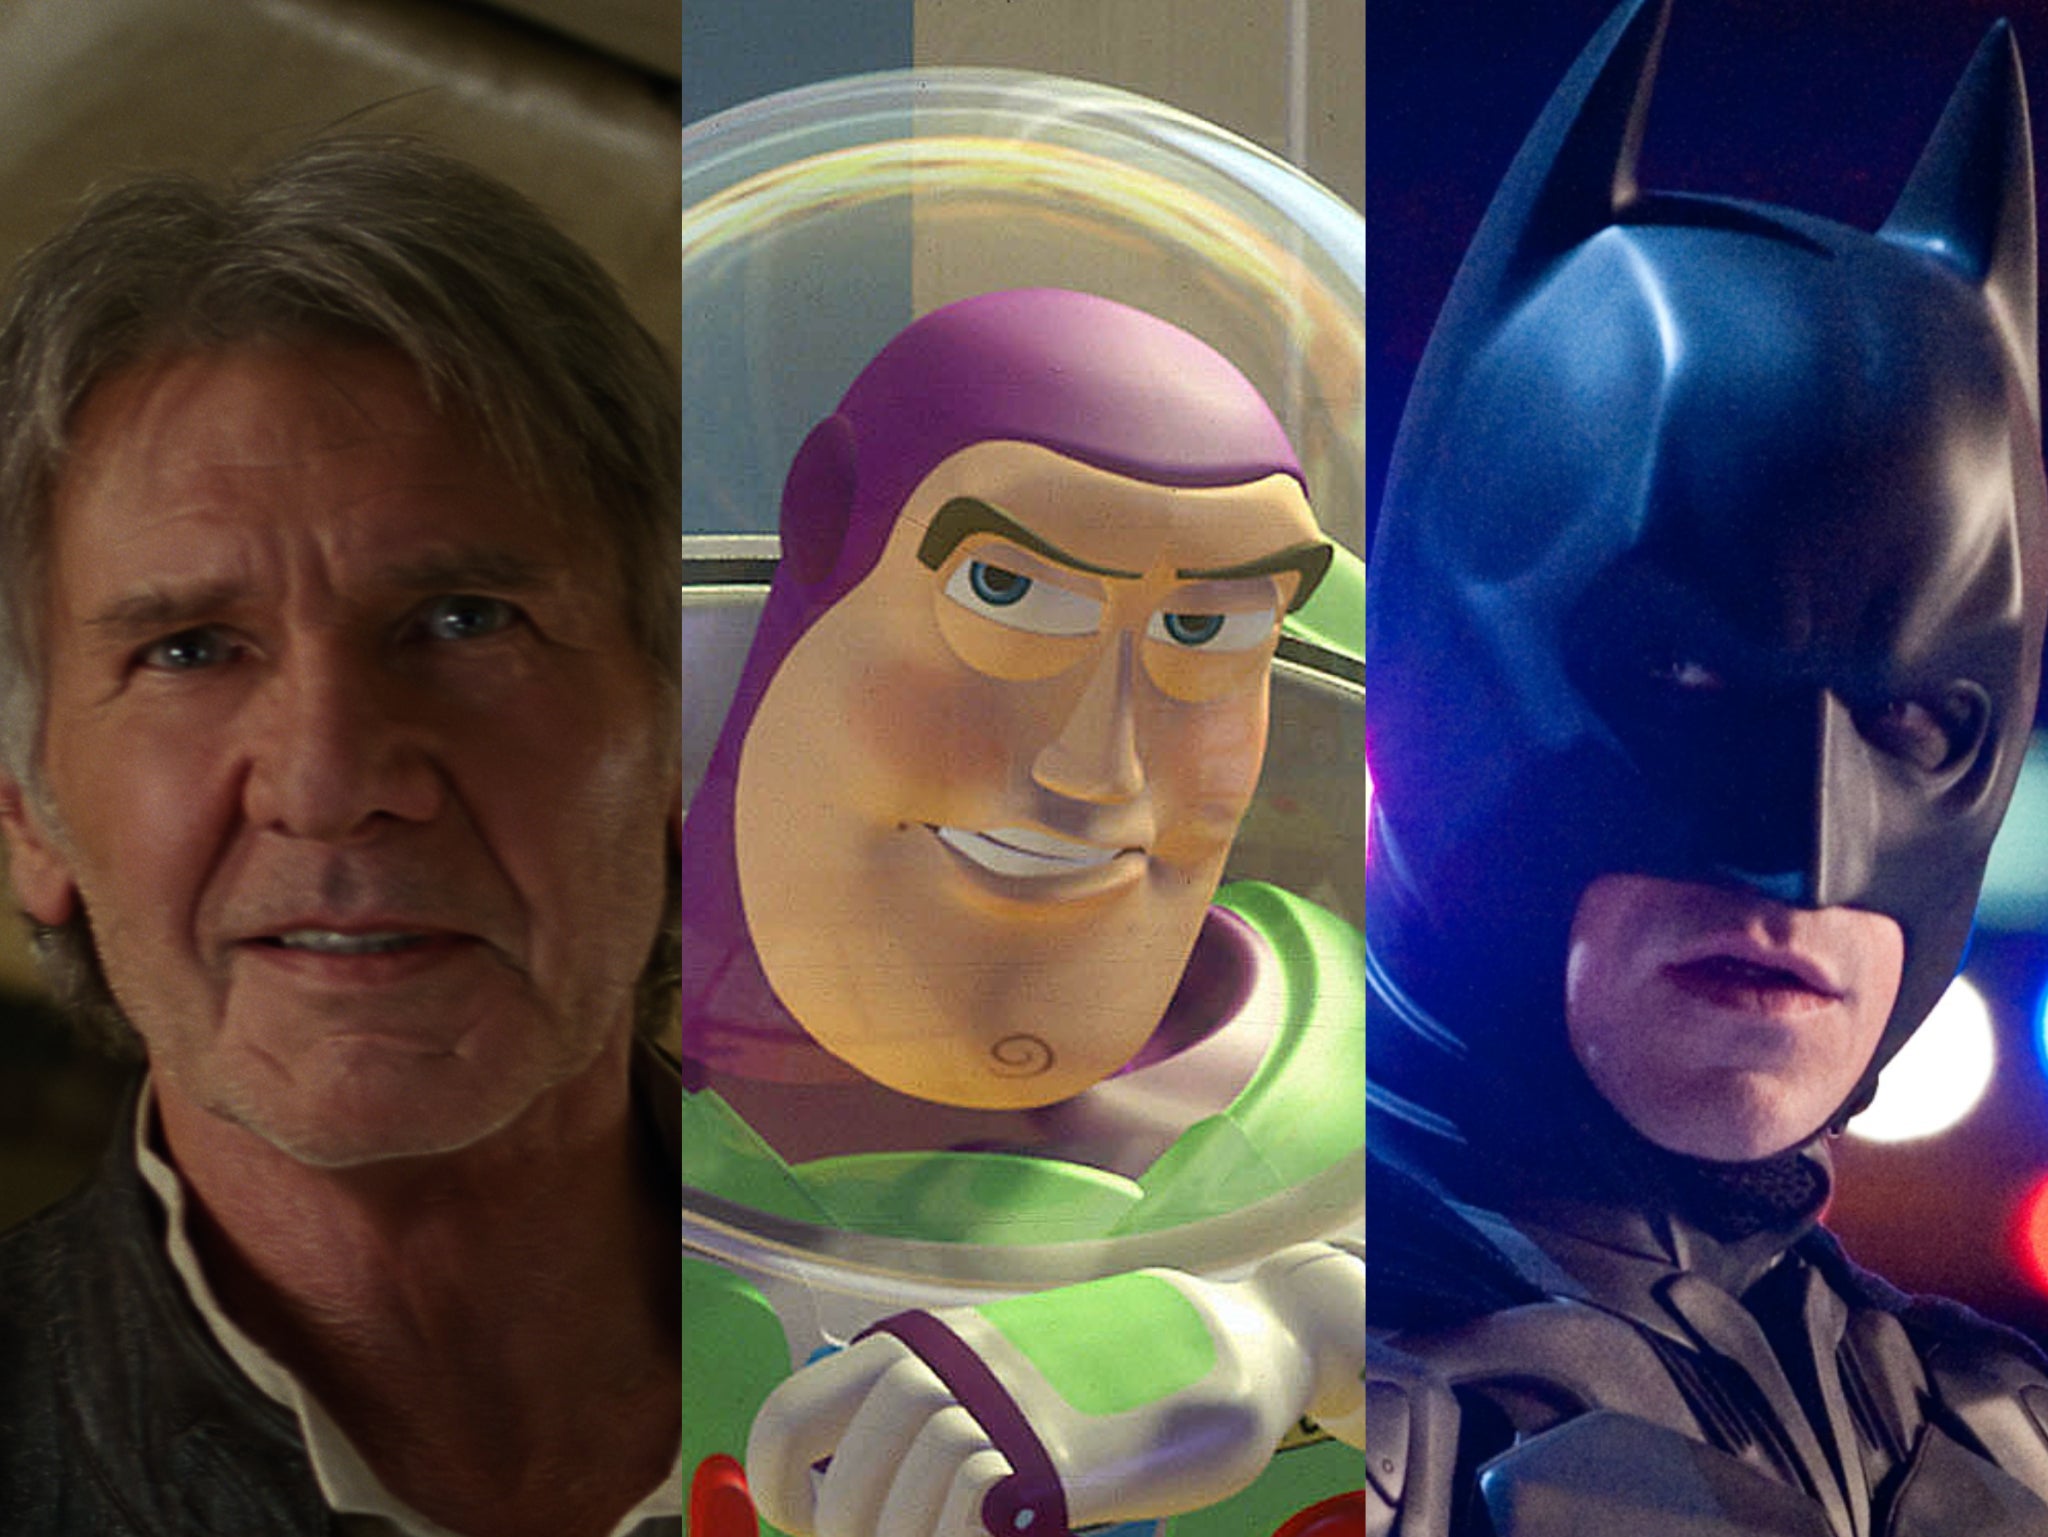 ‘Star Wars: The Force Awakens’, ‘Toy Story’ and ‘The Dark Knight Rises’ are among the films on this list